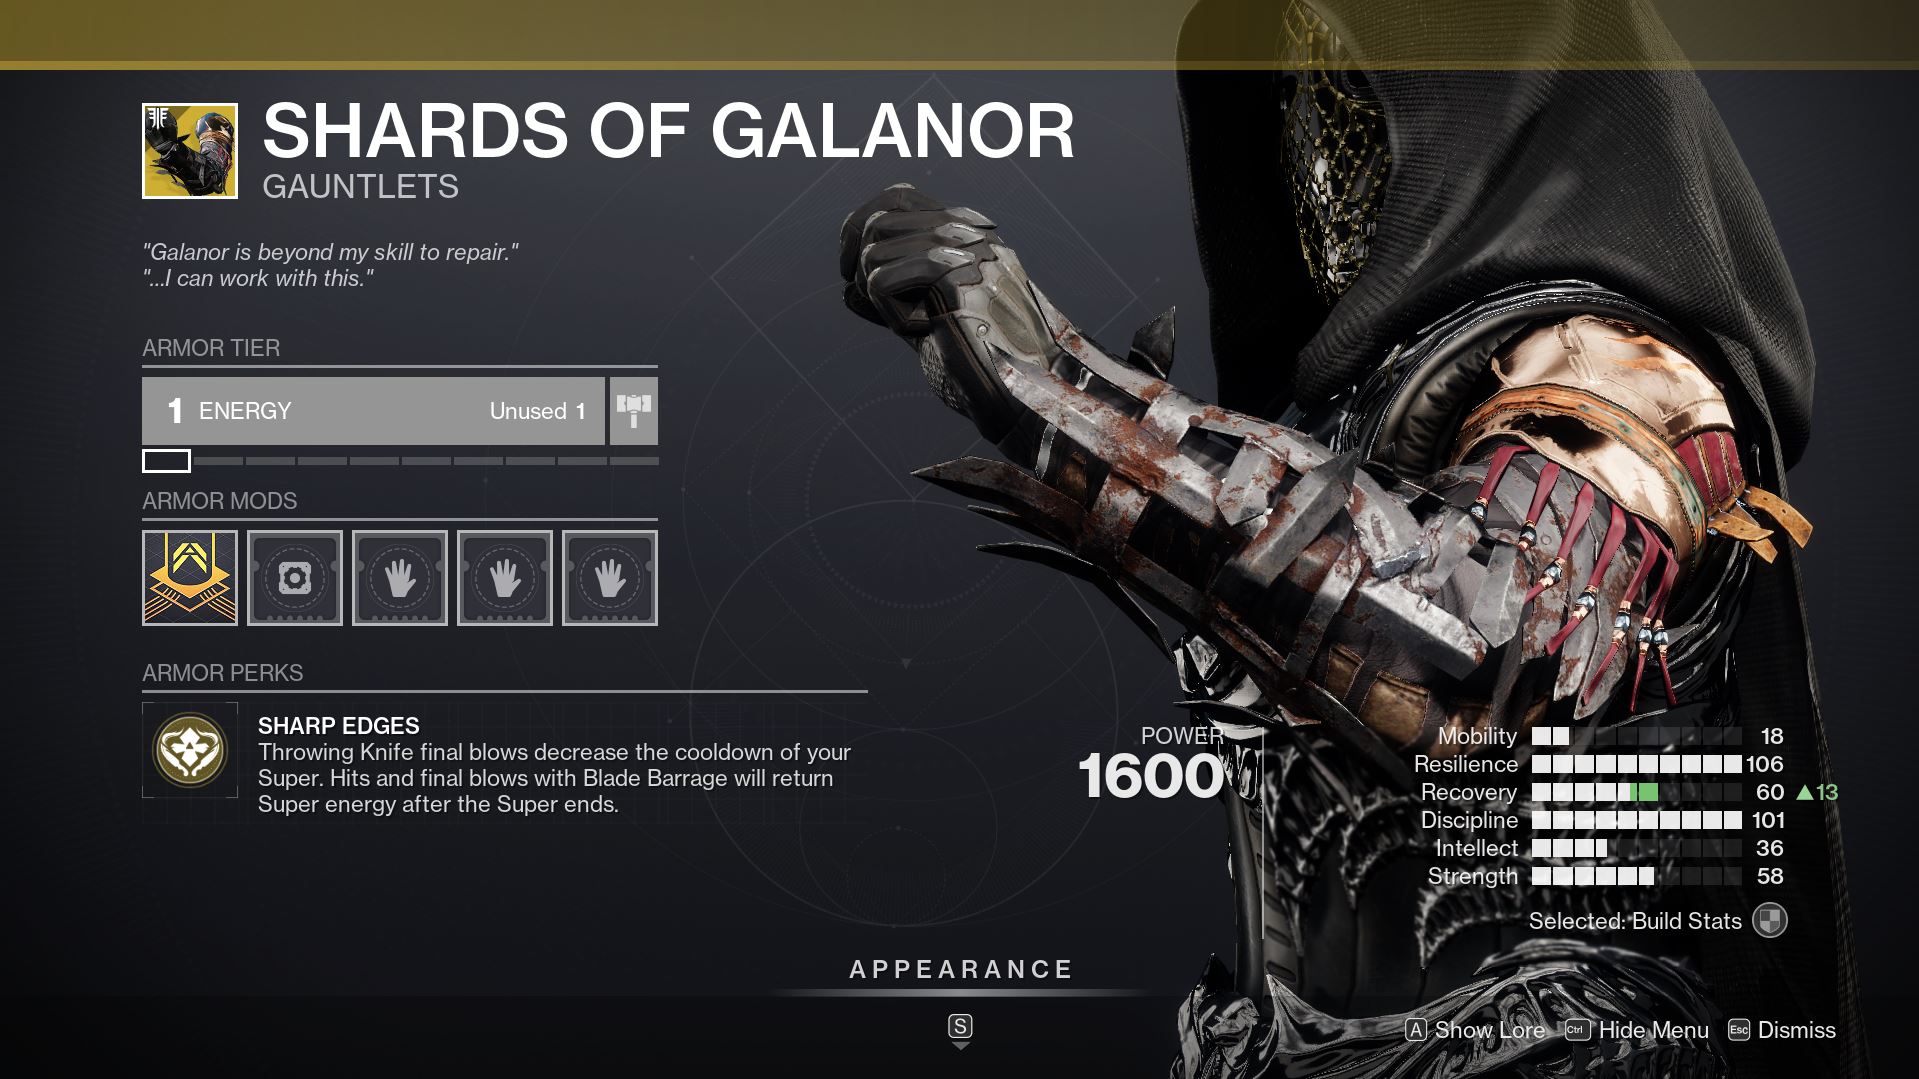 Destiny 2 Shards of Galanor Destiny 2 Has Seemingly Leaked New Exotic Armor Changes In-Game